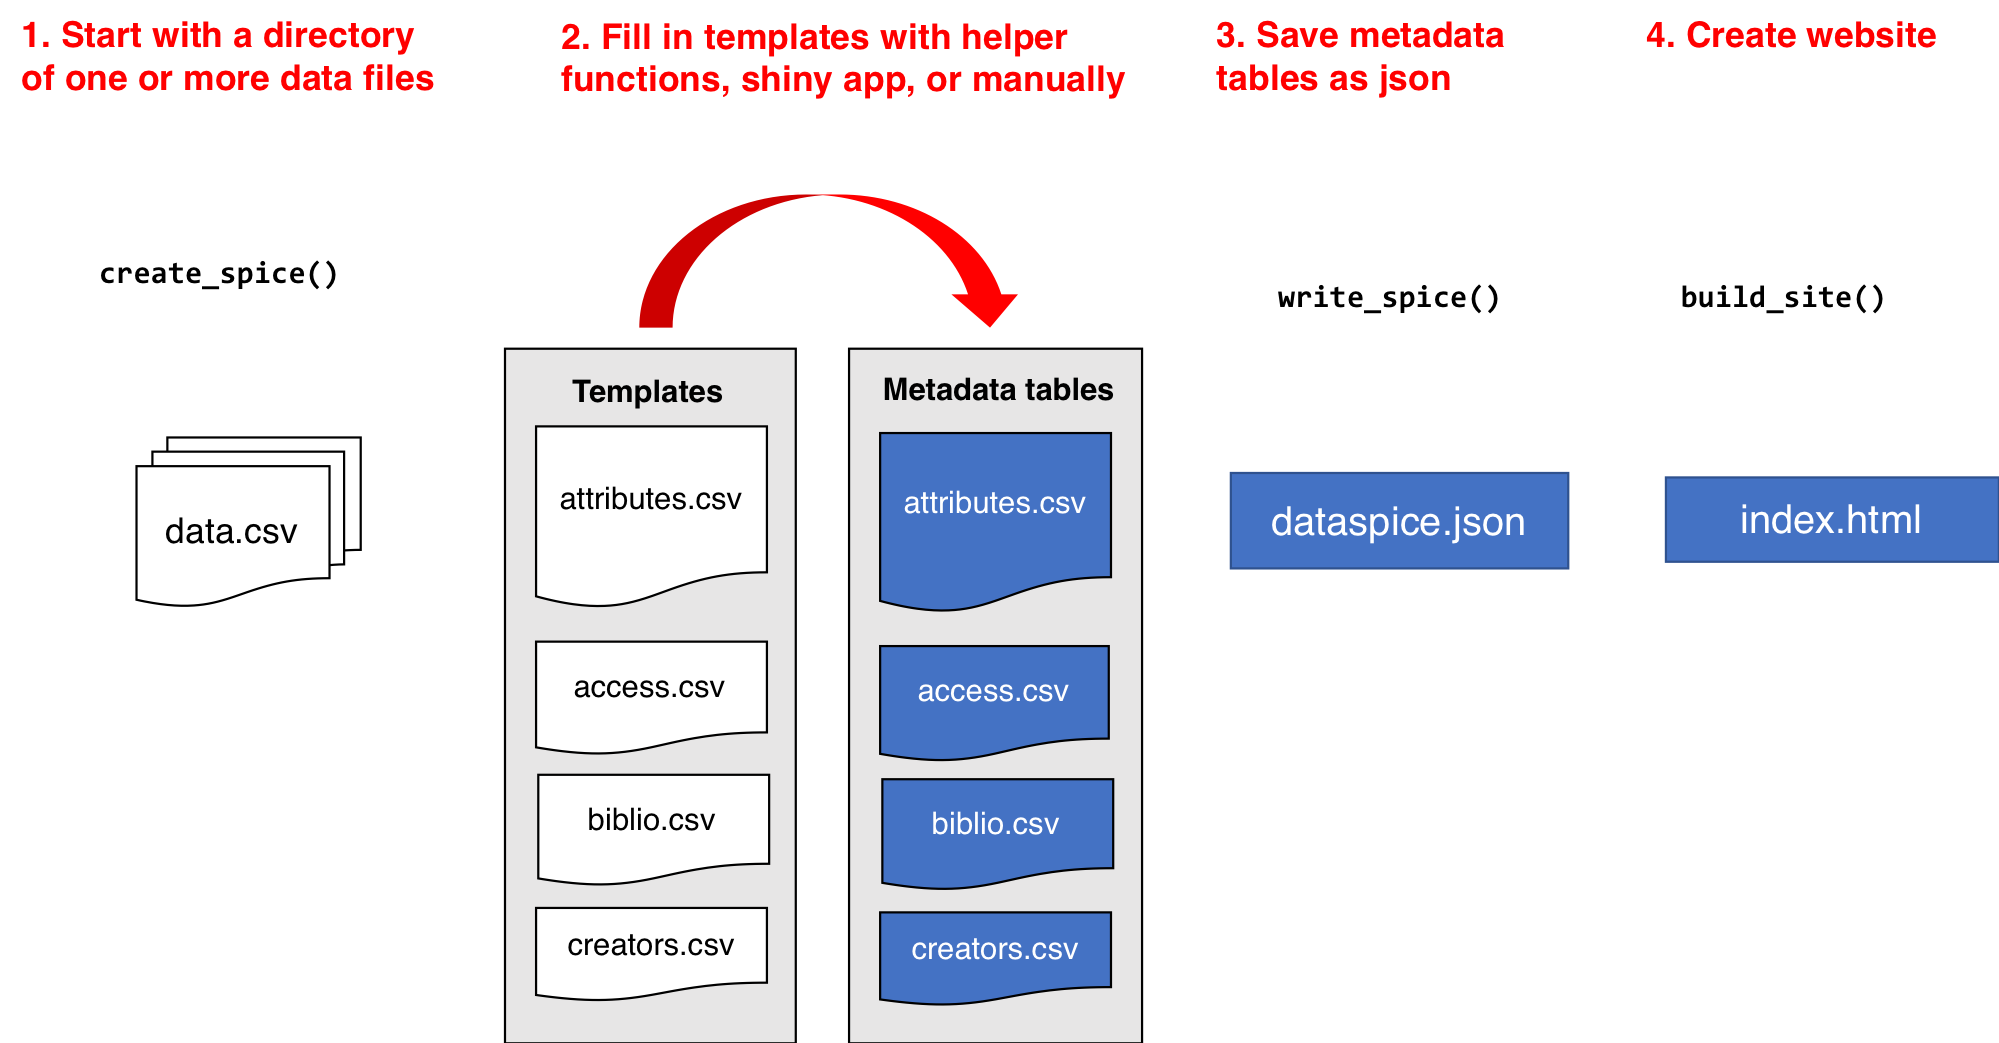 diagram showing a workflow for using dataspice